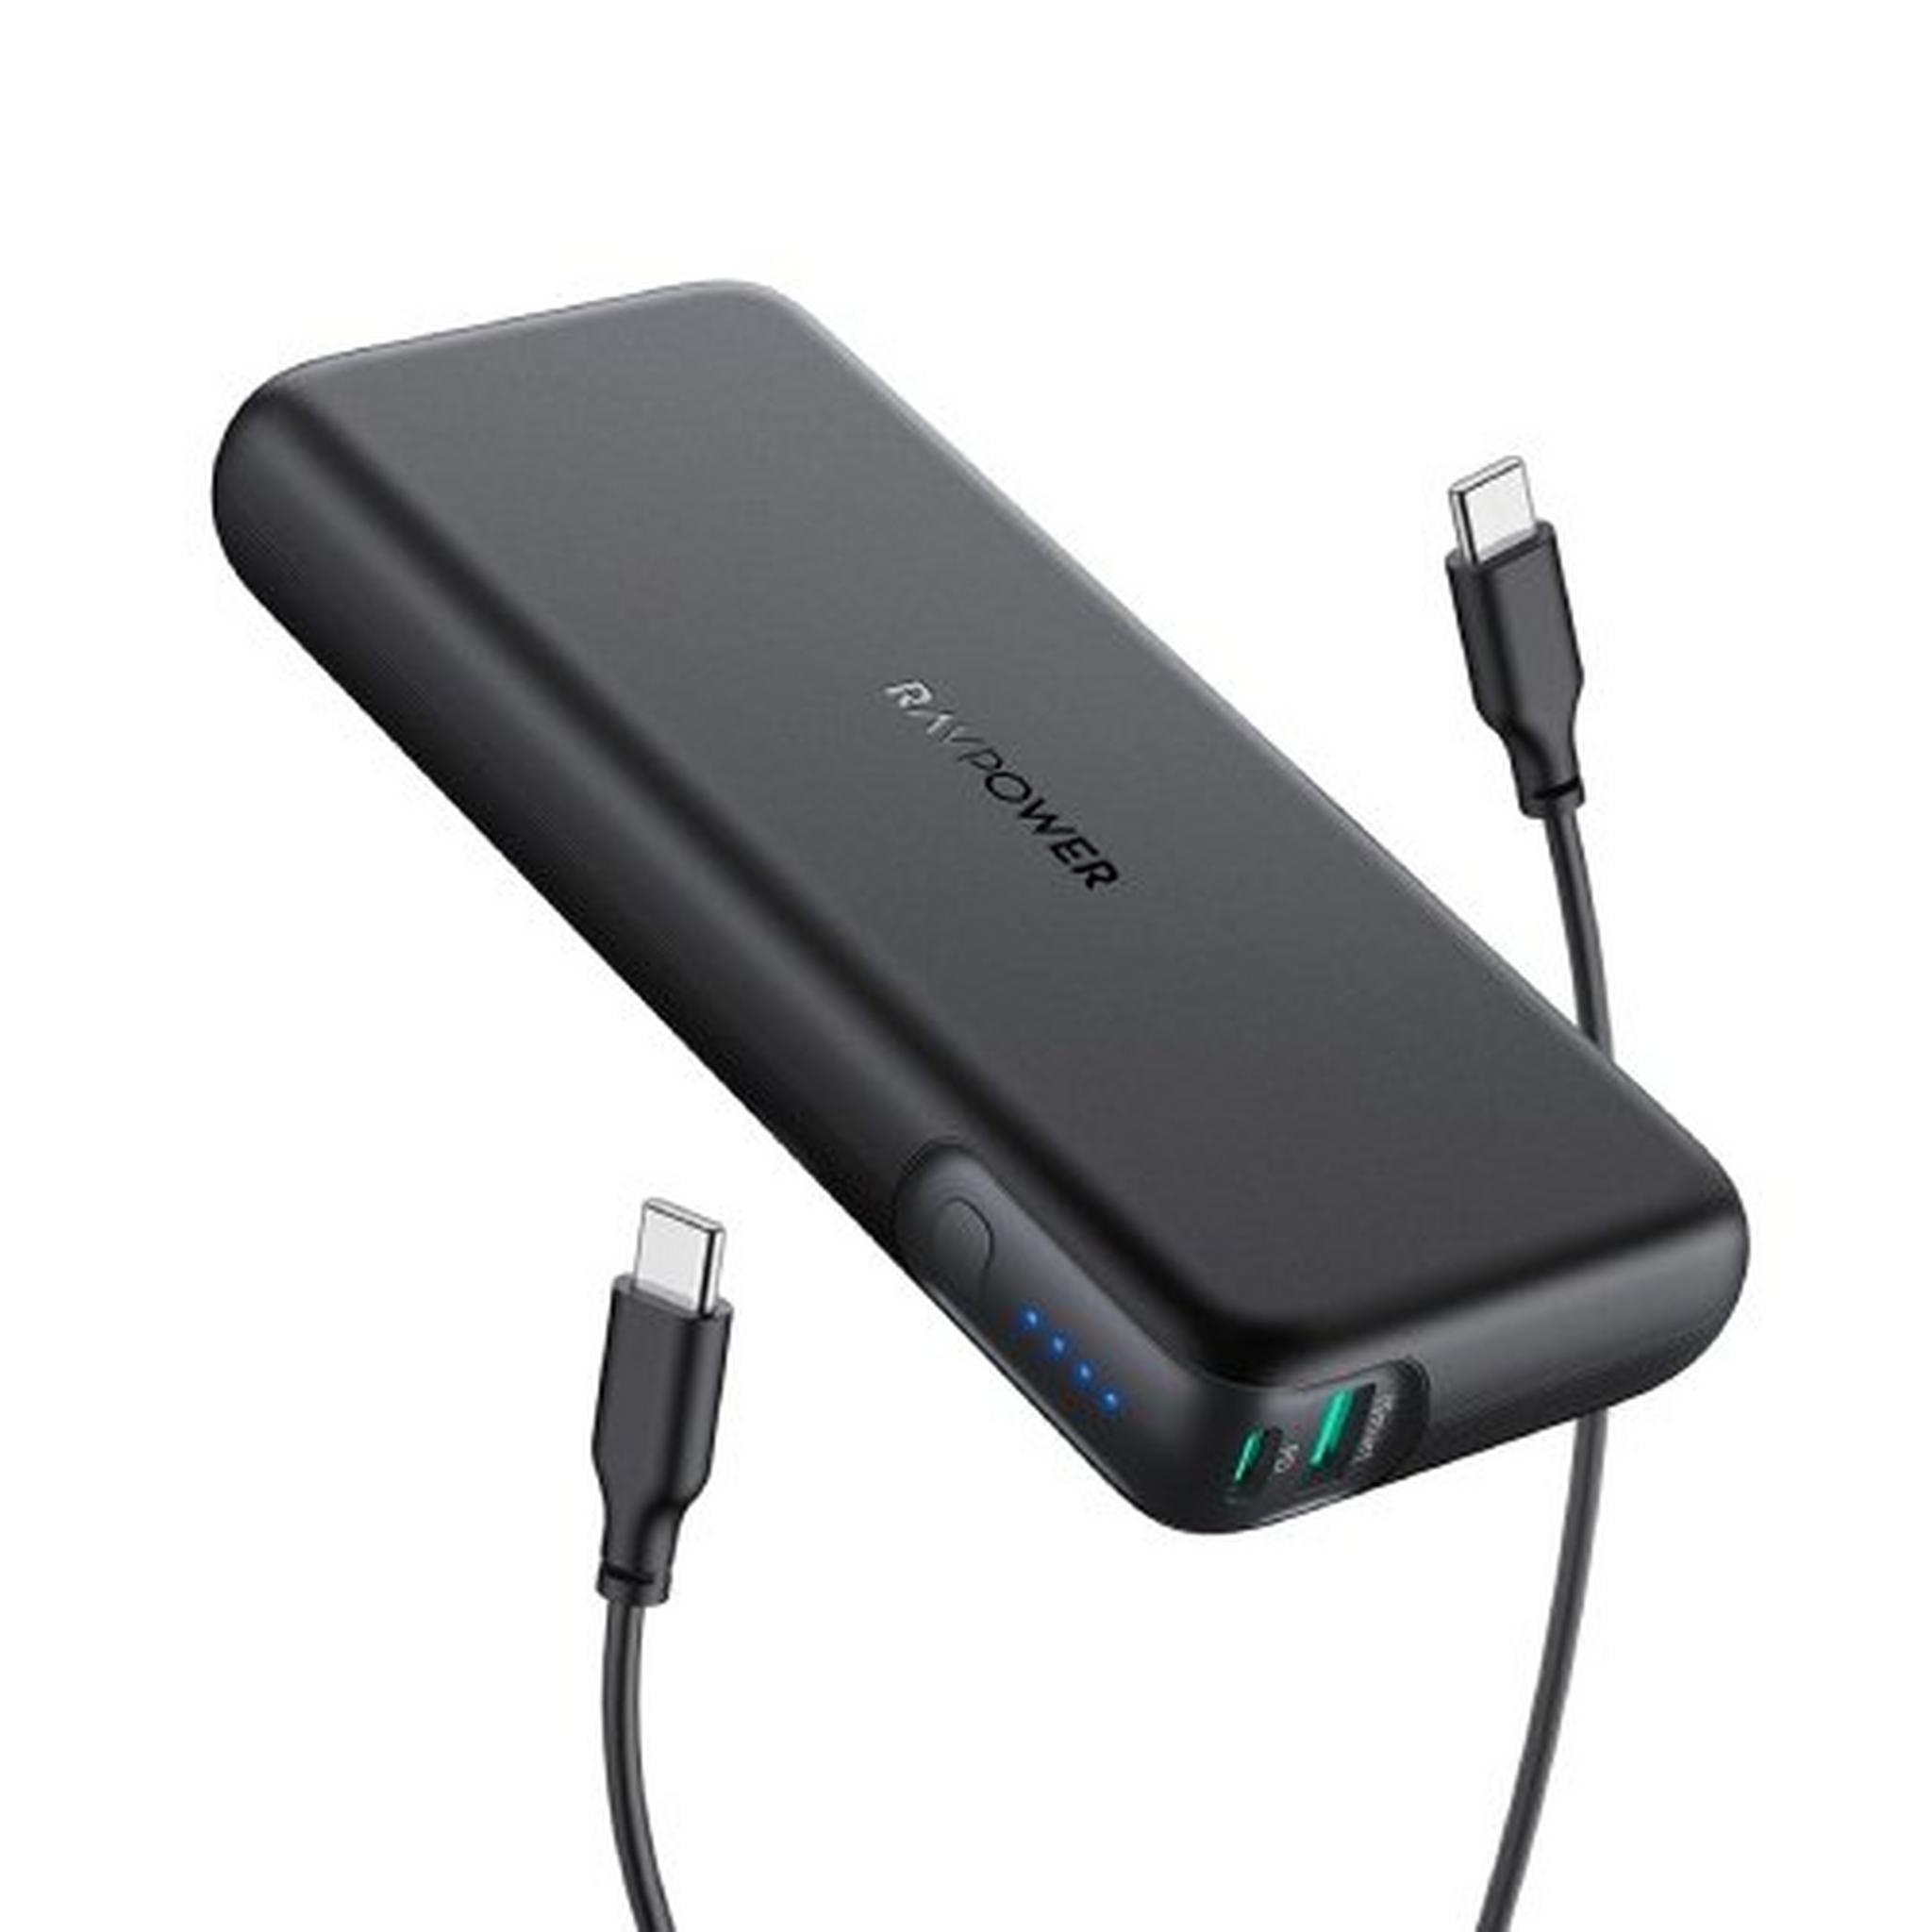 RAVPower PD Pioneer 20000mAh 60W 2-Port Portable Charger - Black